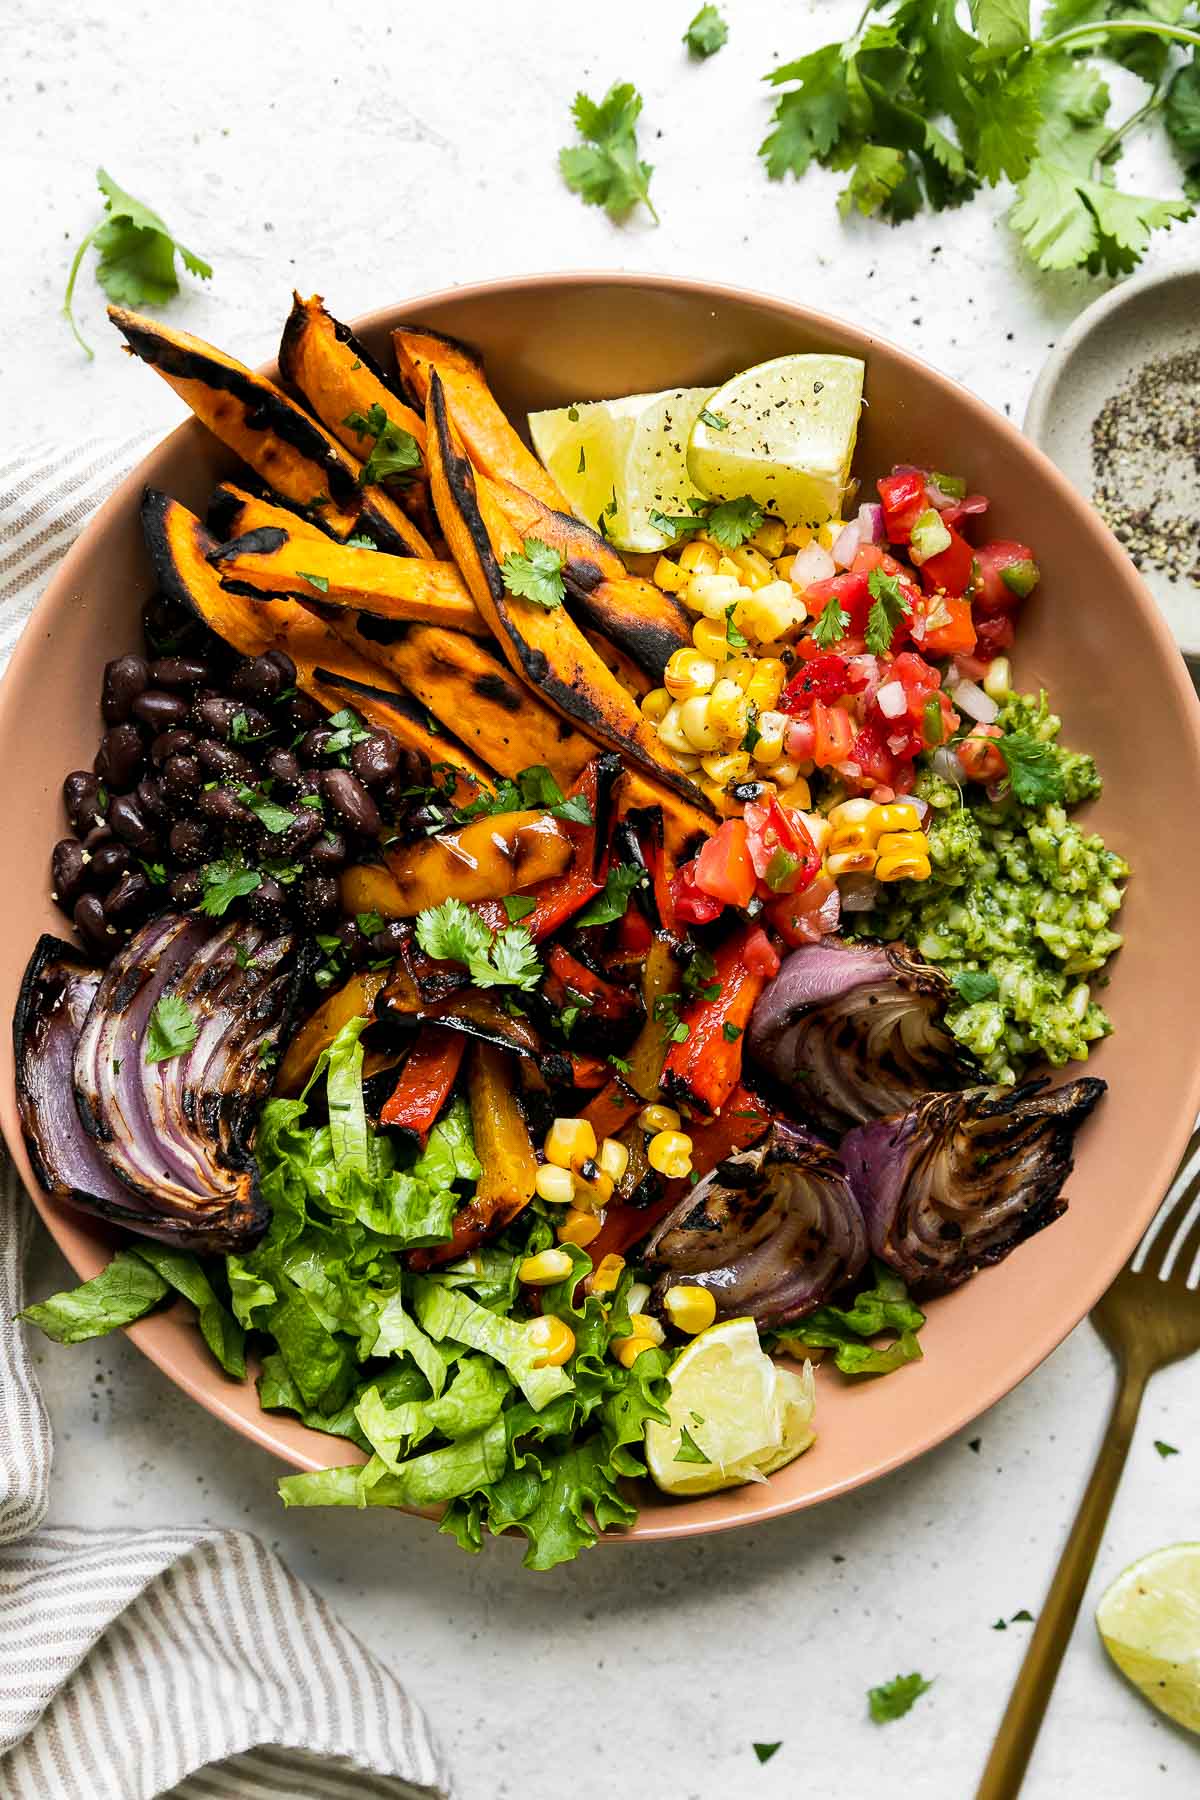 10-Minute No Cook Healthy Lunch Bowls - Beauty Bites